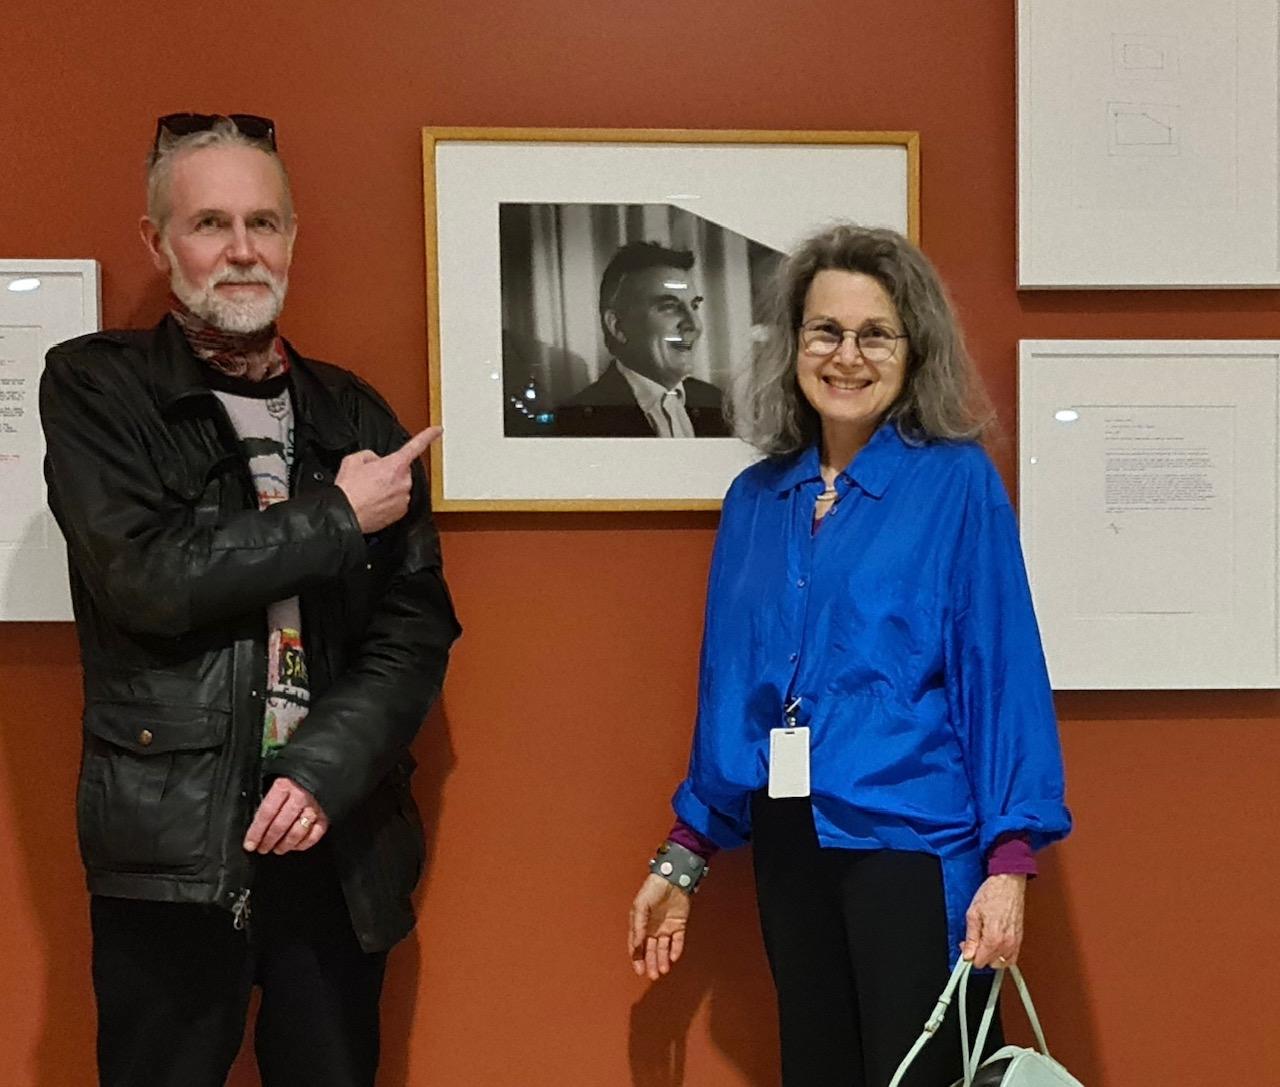 Erling Klingenberg, Kling+Bang, Reykjavik, with Cathy Busby and portrait of Garry Neill Kennedy by Lawrence Weiner, HORIZONS, Vancouver Art Gallery, 2024